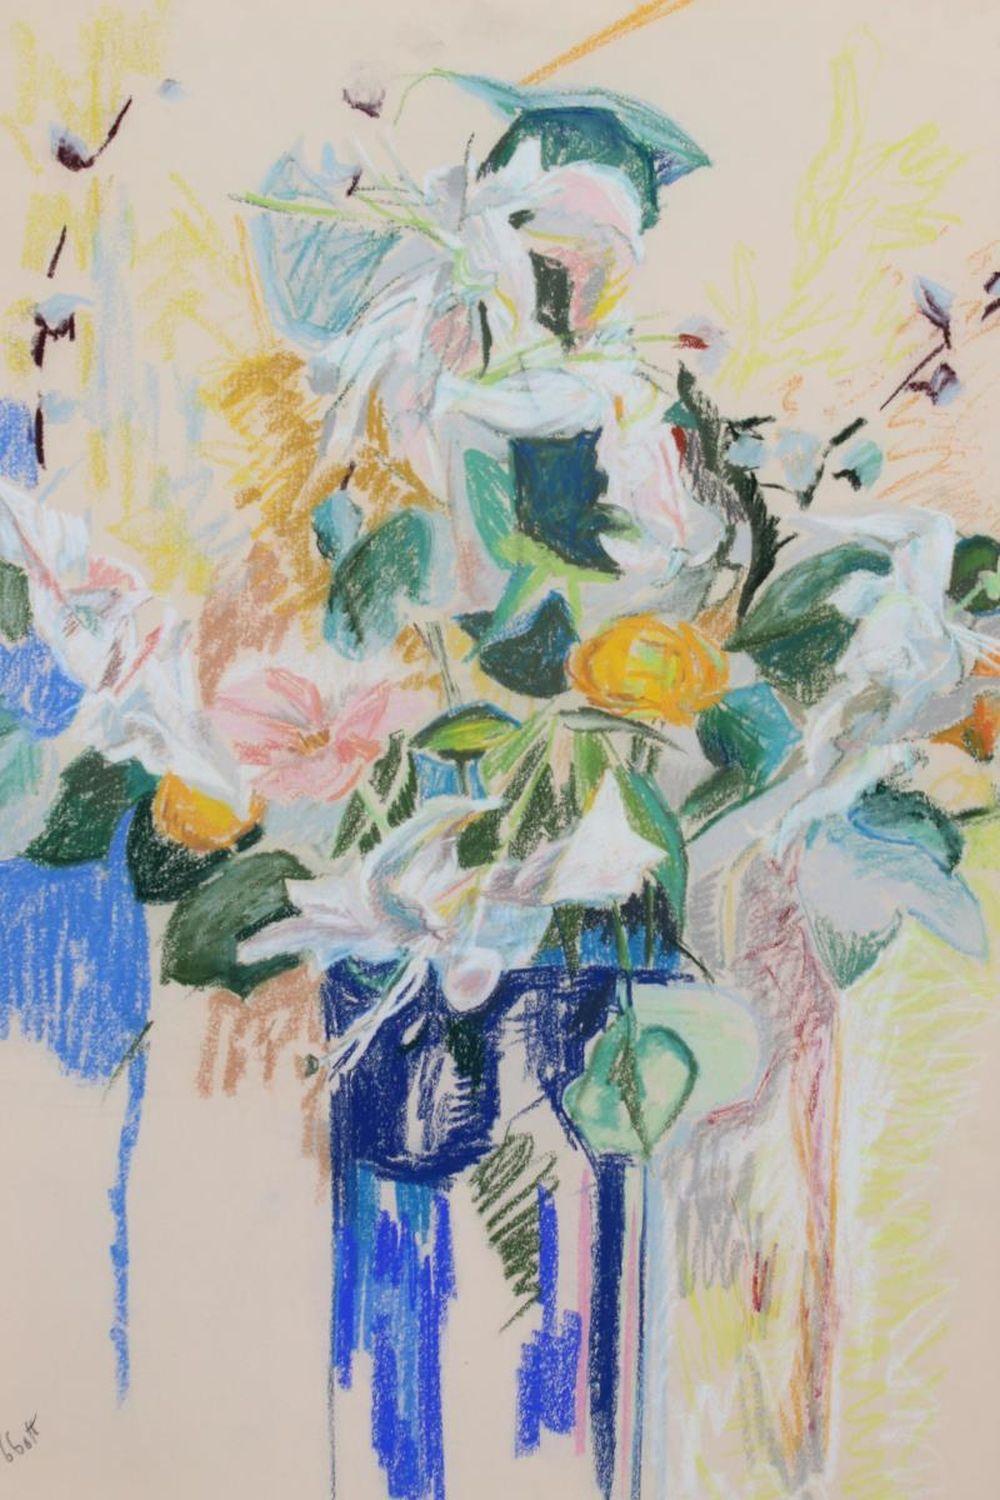 Mary Abbott
Flowers, circa 1950
Signed lower left
Pastel on paper
30 x 22 1/4 inches

Provenance:
Aaron Galleries, Glenview, Illinois

Among the early exponents of Abstract Expressionism, Mary Abbott created powerful oil paintings in which she